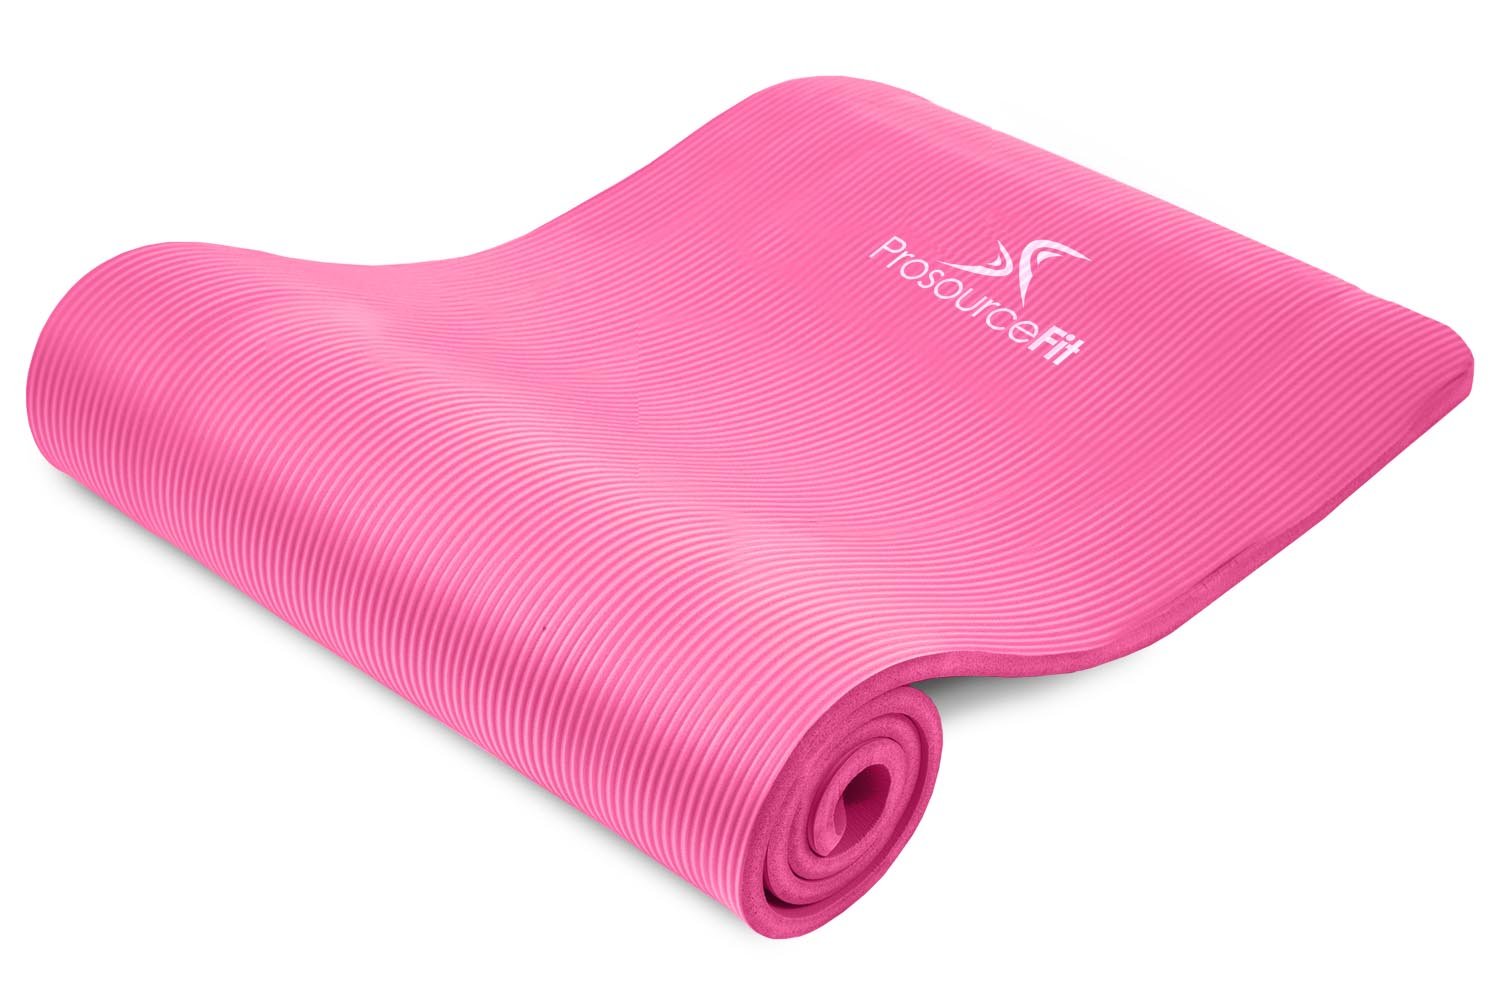 Extra Thick Yoga and Pilates Mat 1/2 inch 8 Colors The extra thick yoga and Pilates  mat uses high density foam for 1/2-inch thickness, great for use on hard  floors. The extra